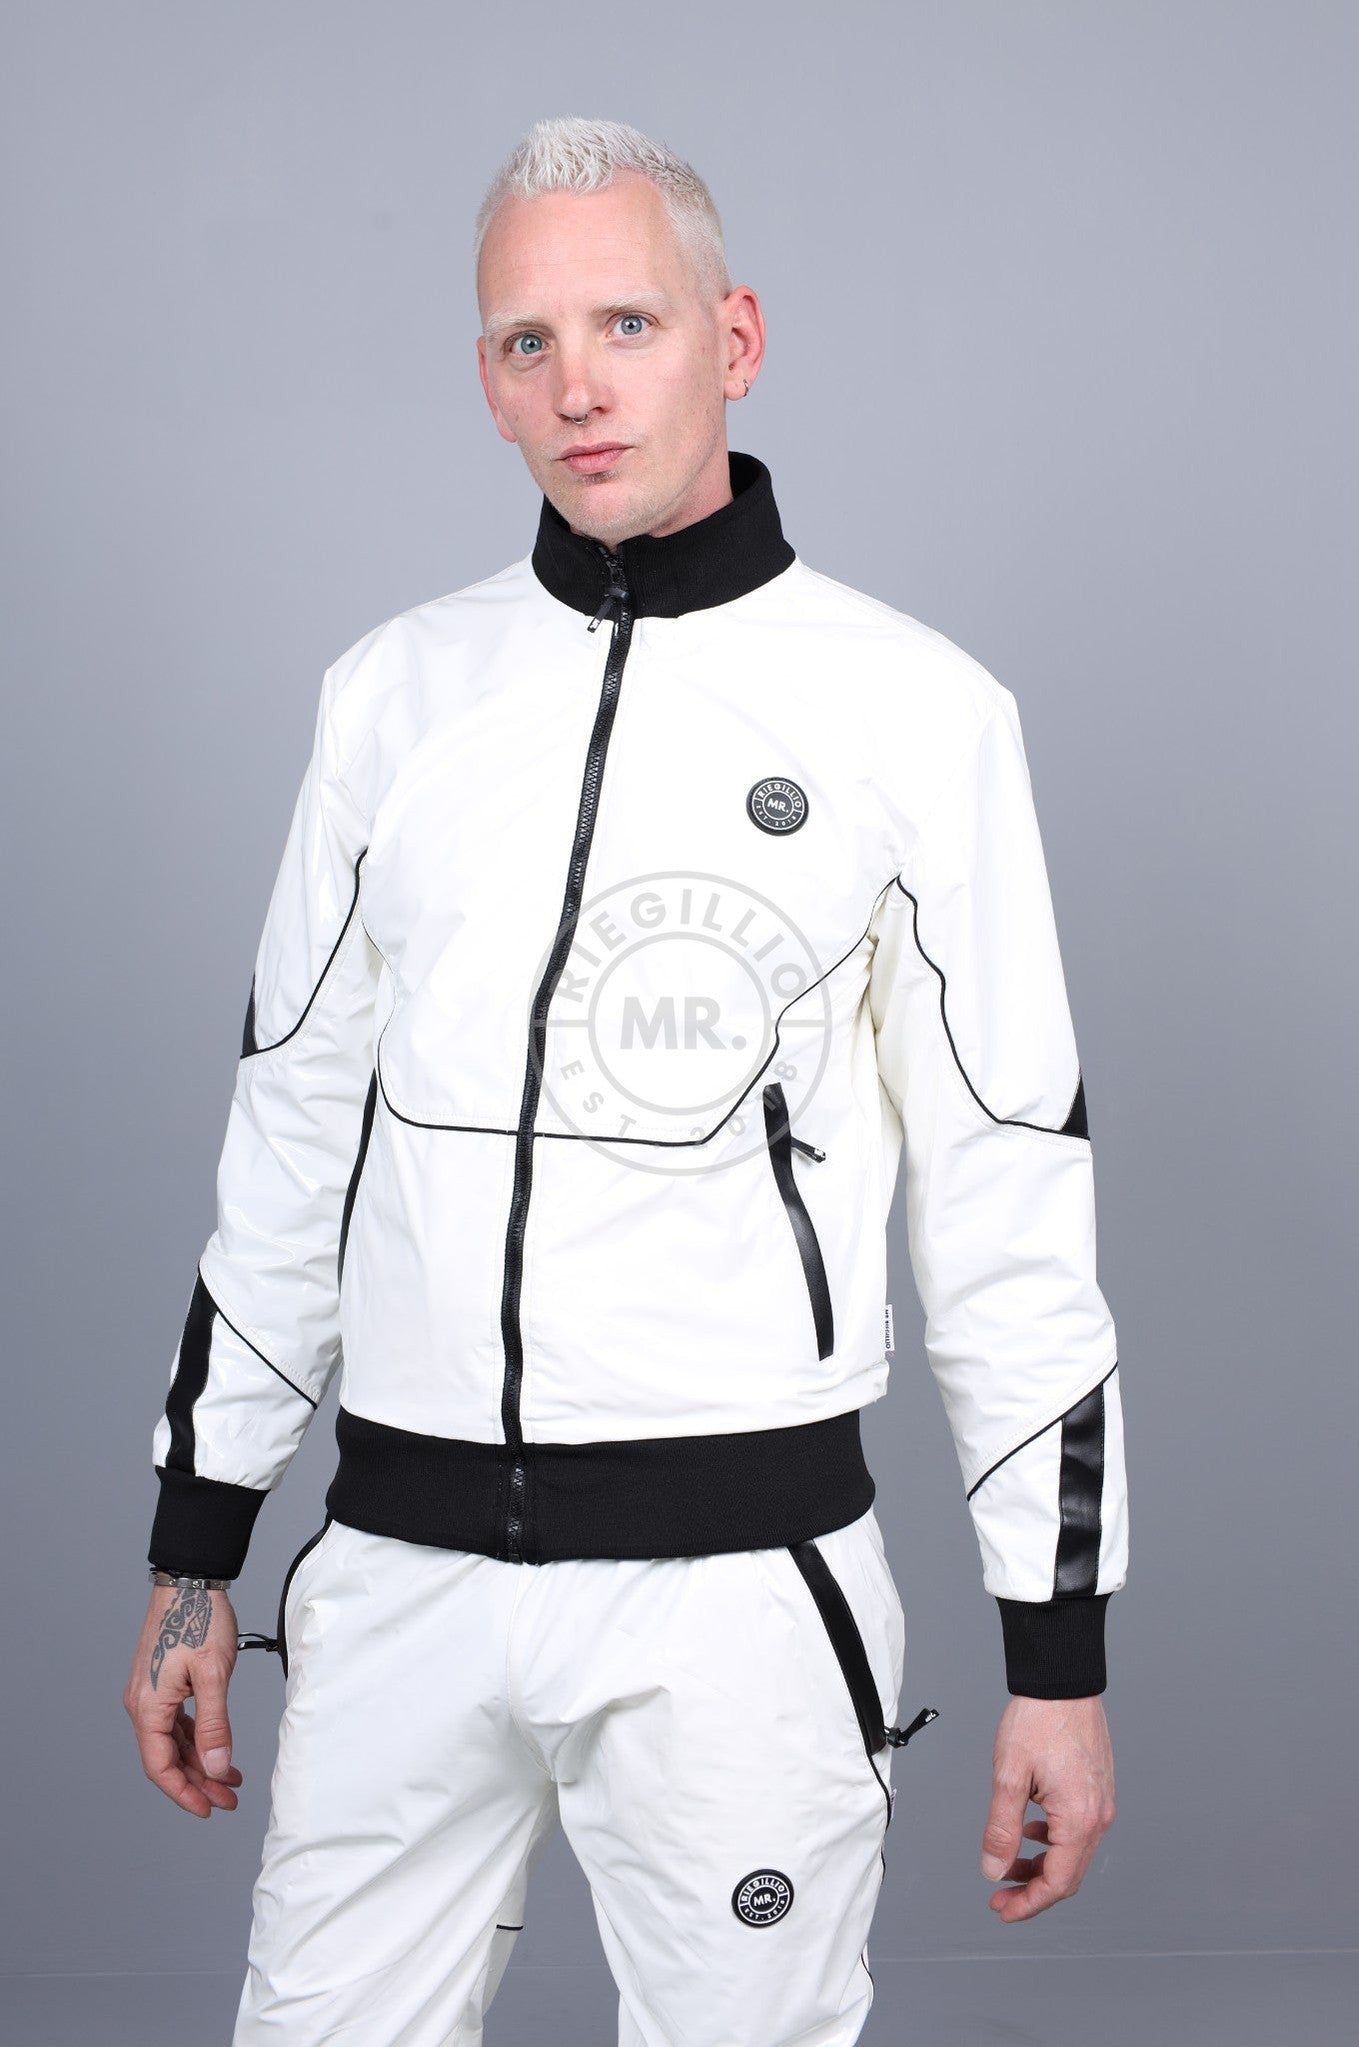 PVC 24 Tracksuit Jacket - White with Black Piping-at MR. Riegillio